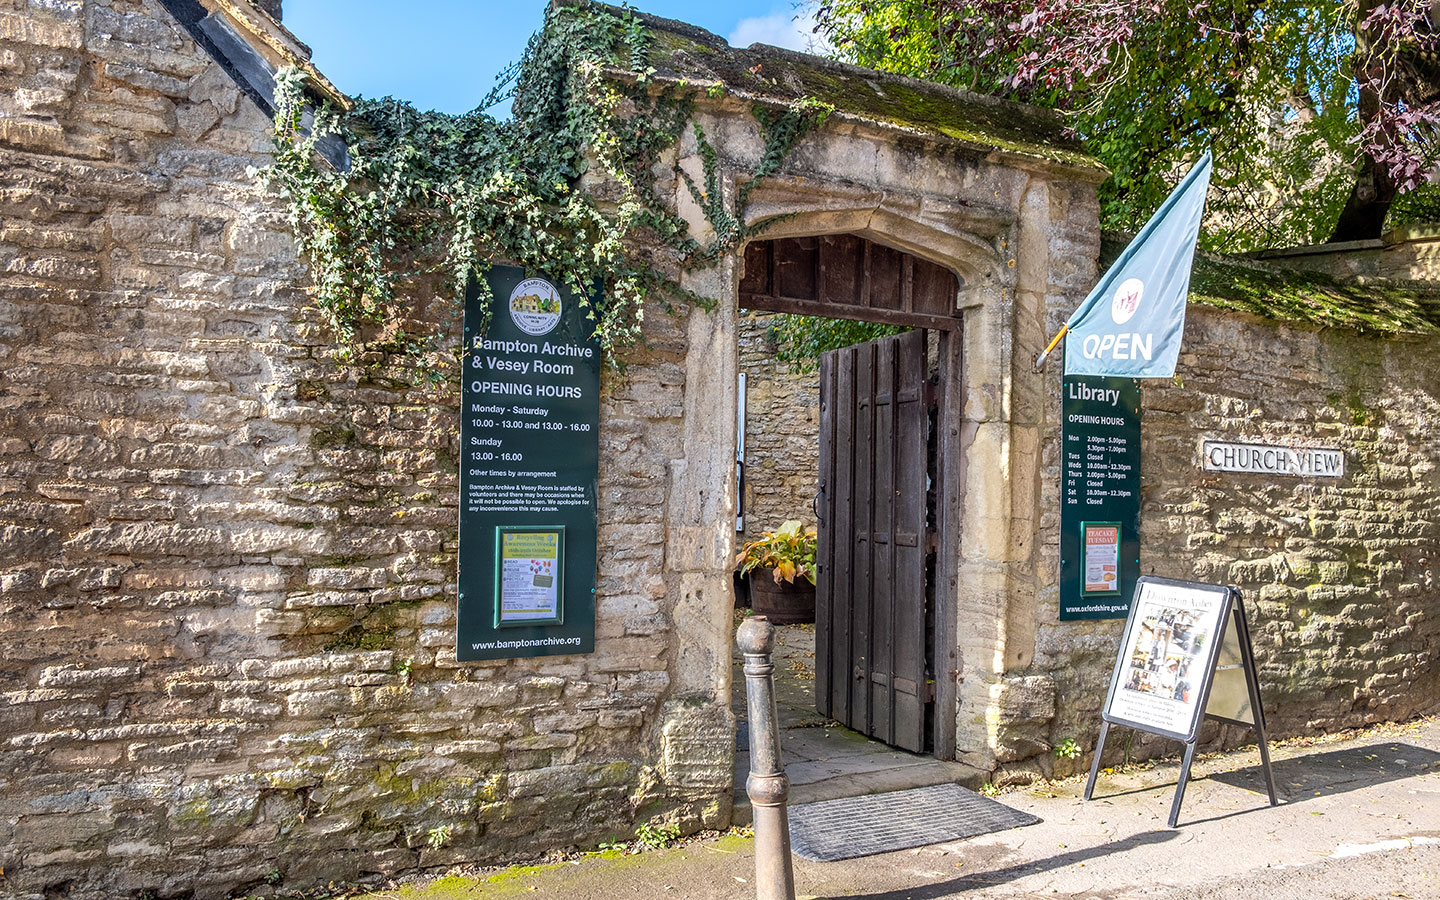 The entrance to Bampton Library, Downton Abbey filming location